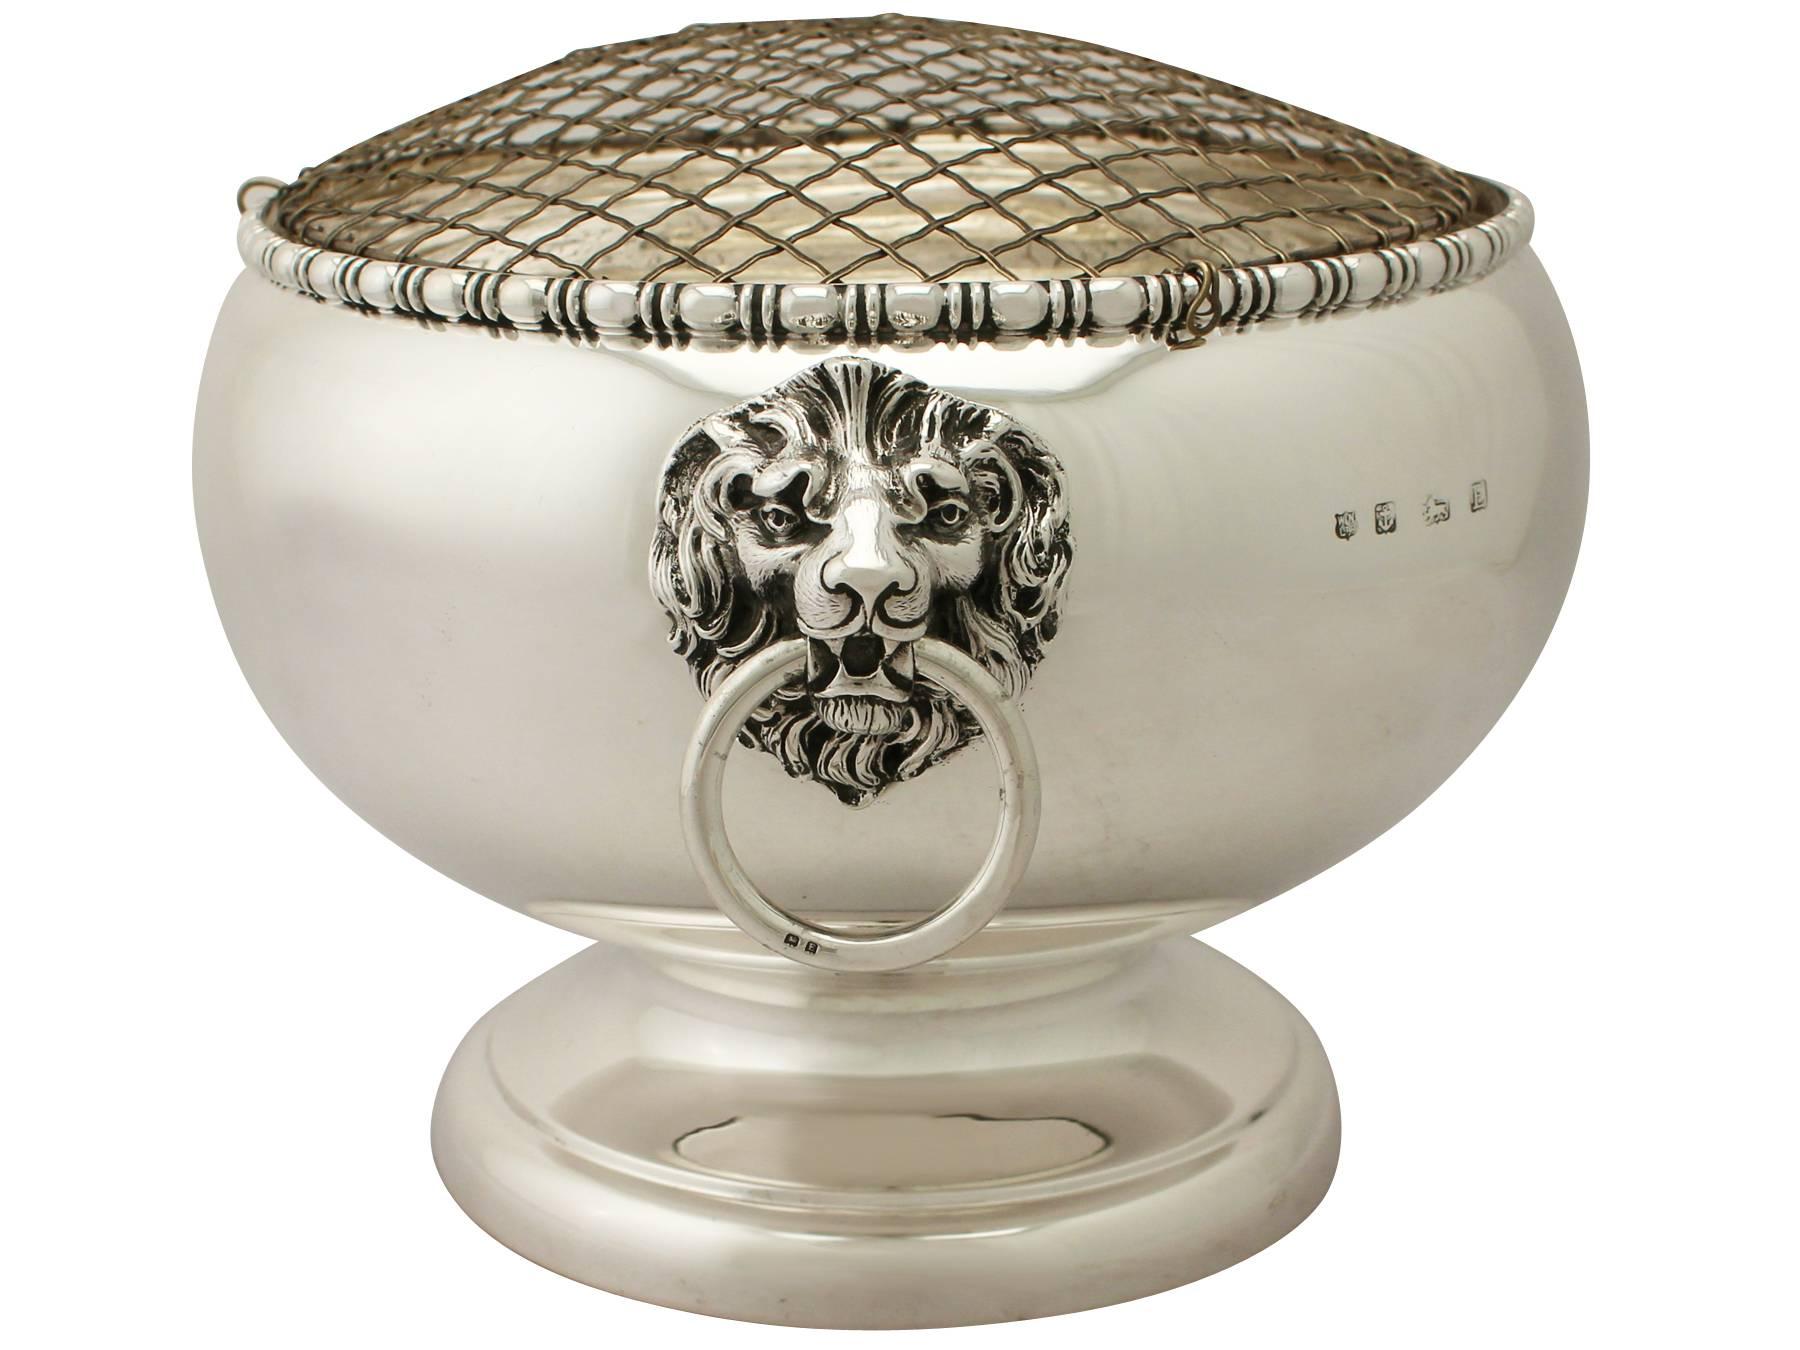 An exceptional, fine and impressive antique George V English sterling silver centerpiece/bowl, an addition to our ornamental silverware collection.

This exceptional antique George V sterling silver centerpiece bowl has a plain circular rounded